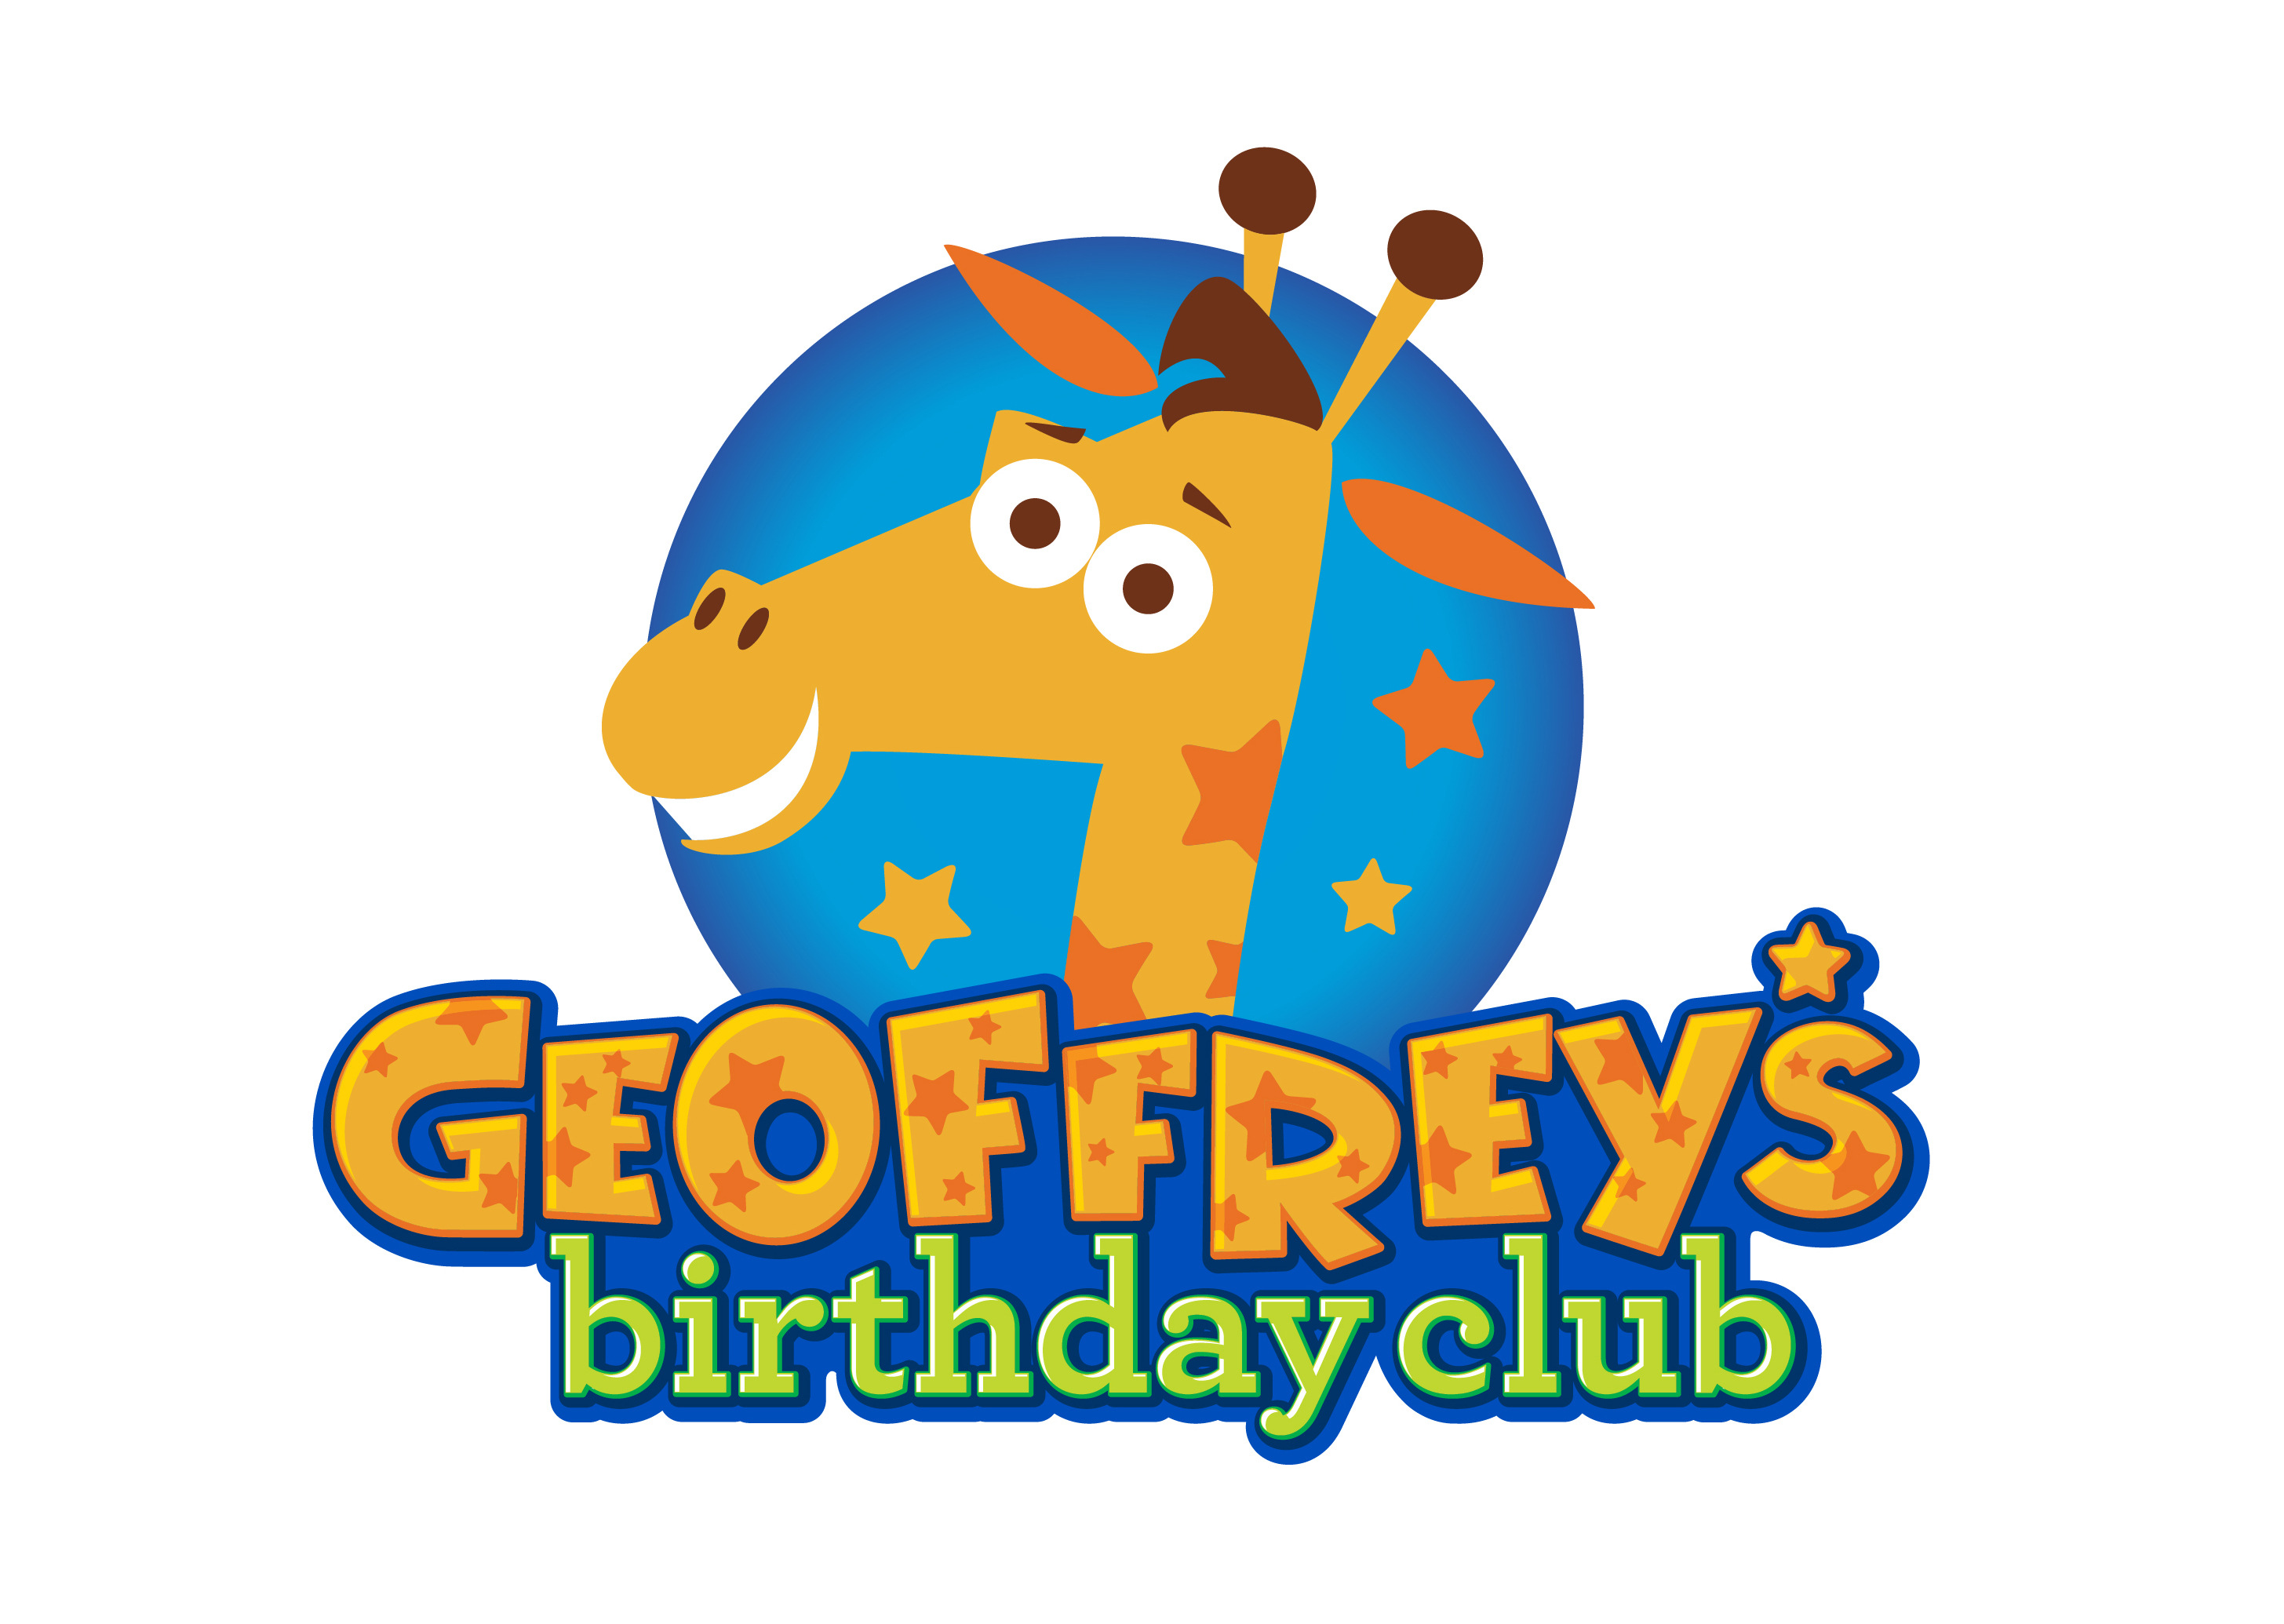 Celebrate Baby’s 1st Birthday with Babies”R”Us and Geoffrey’s Birthday Club #BabysFirst #Giveaway